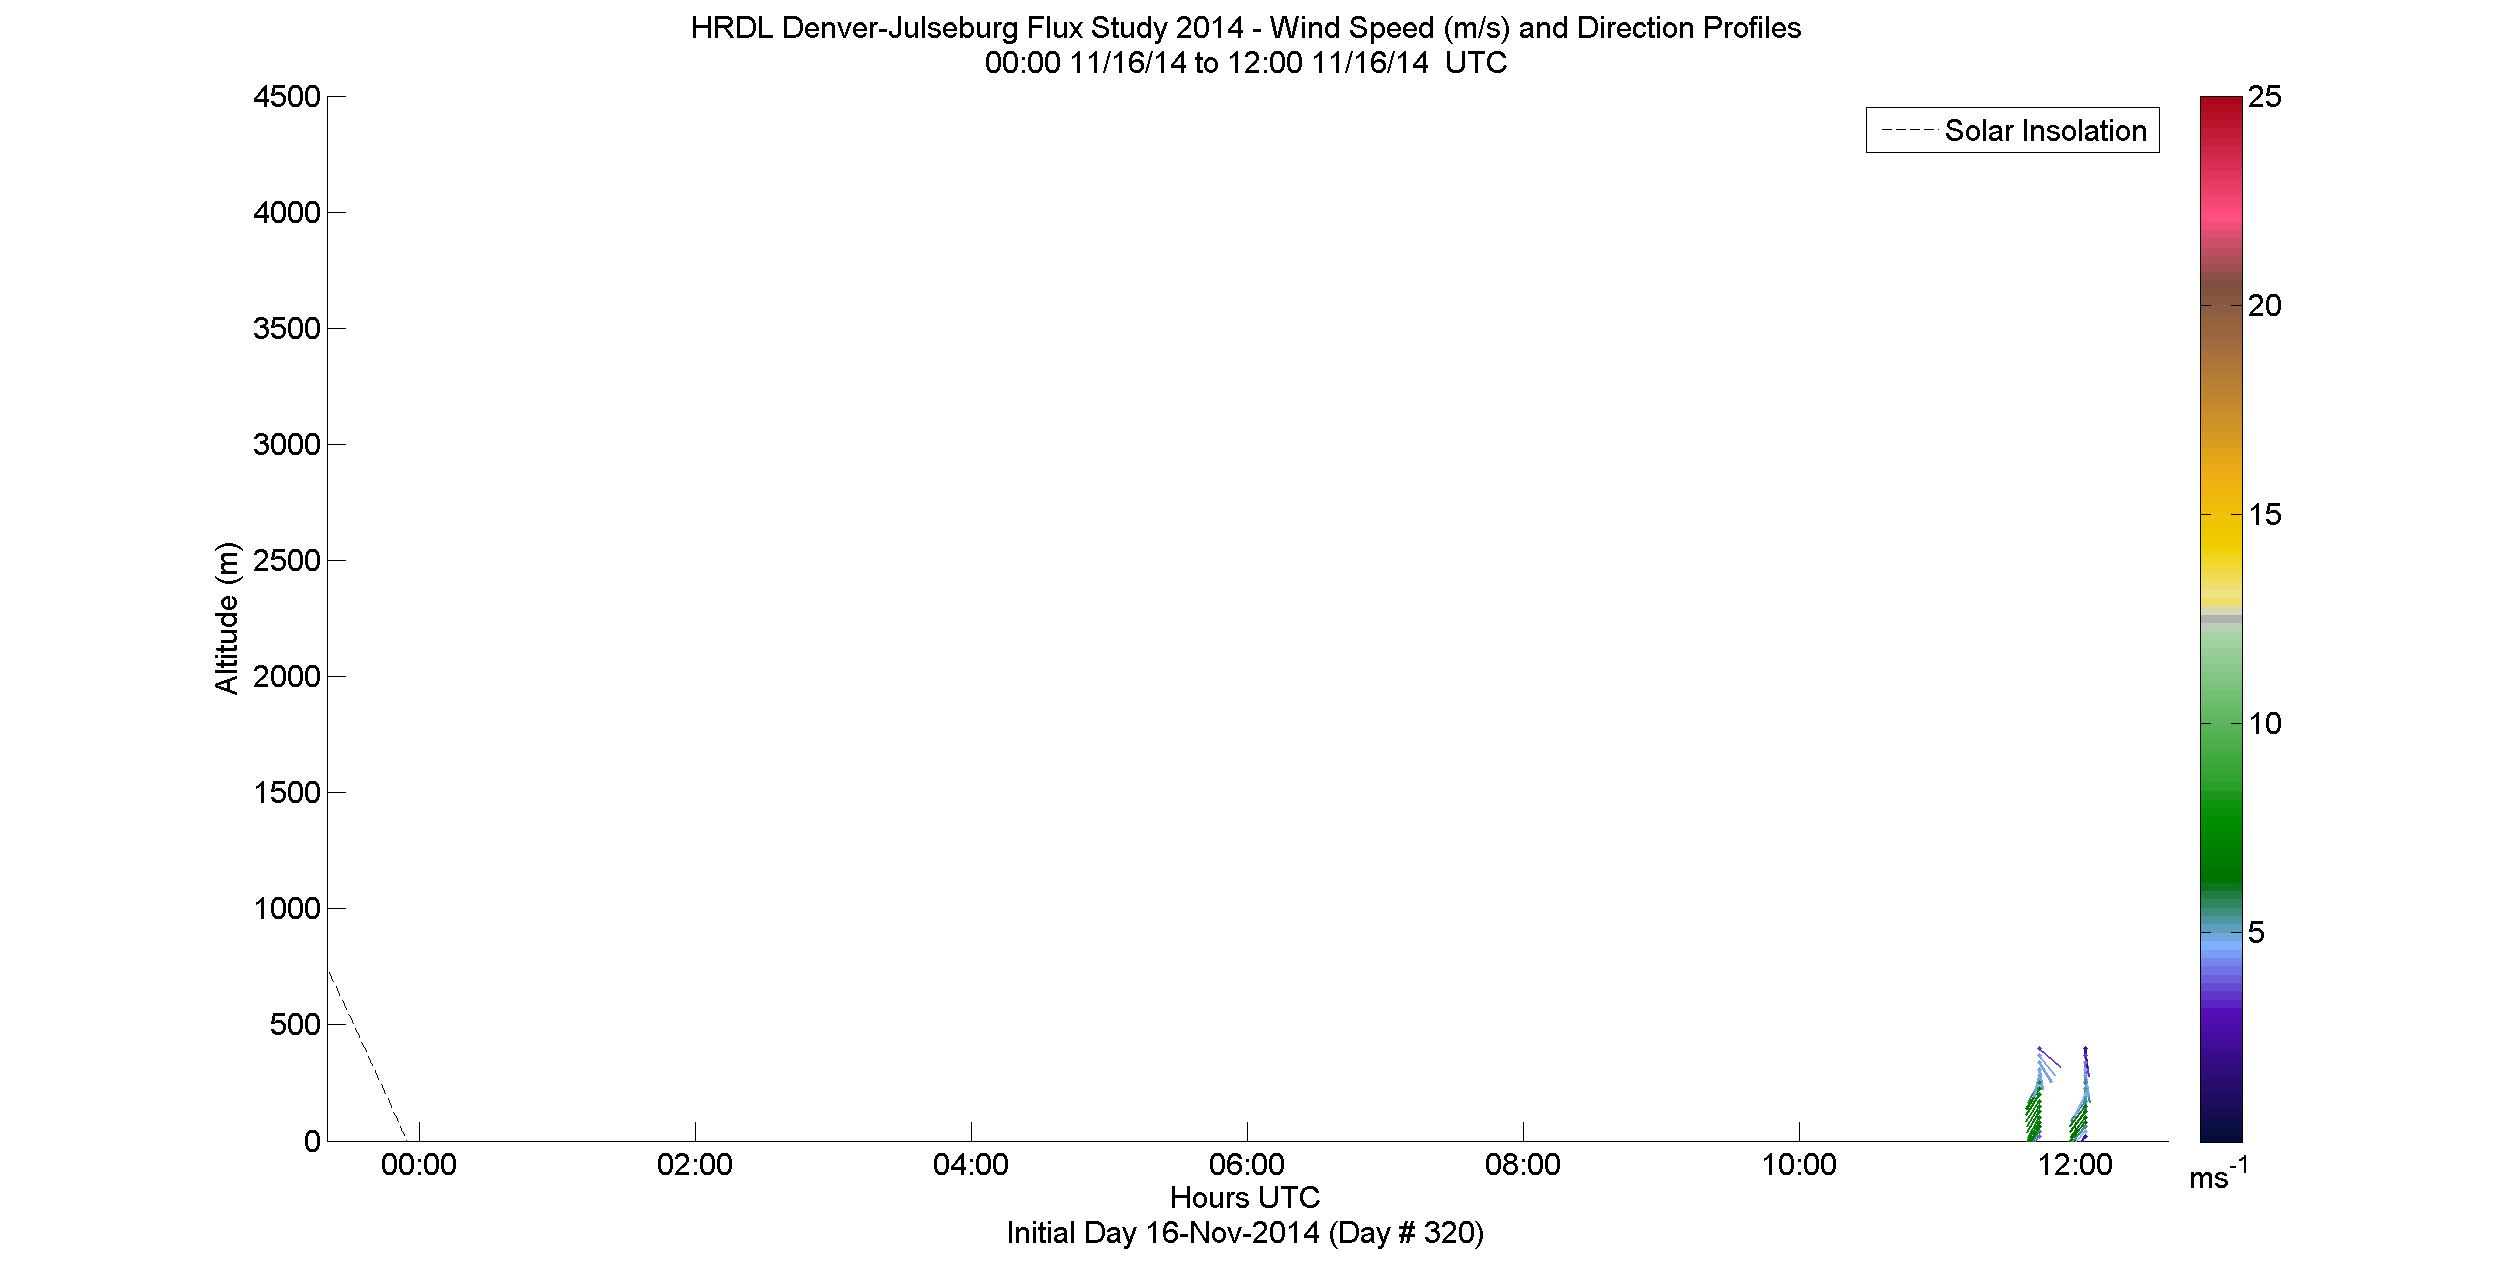 HRDL speed and direction profile - November 16 am